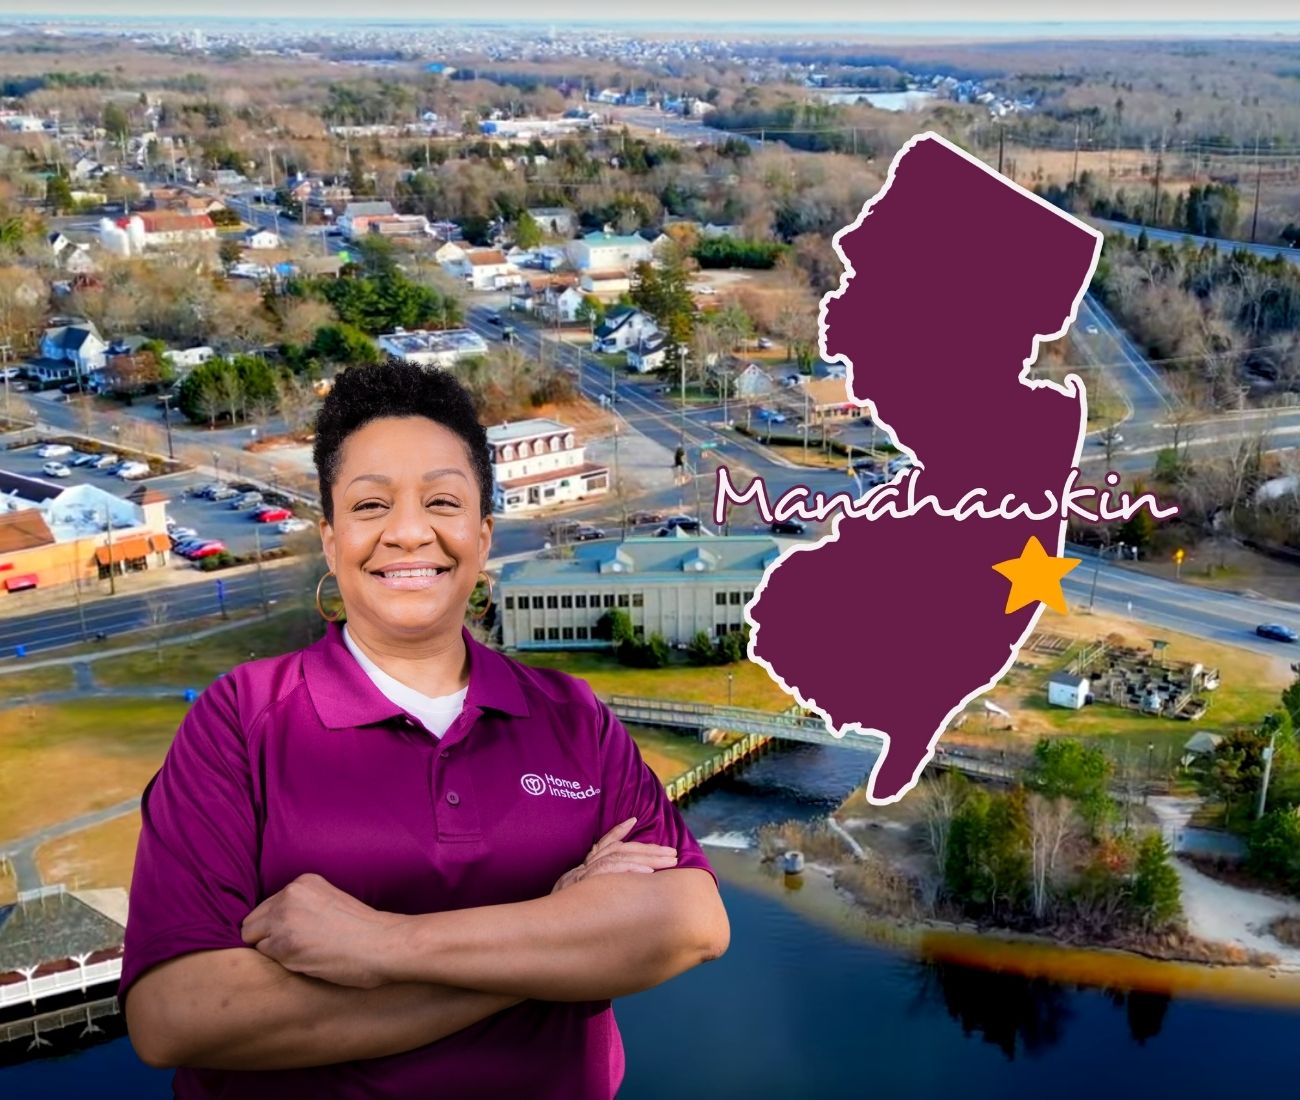 Home Instead caregiver with Manahawkin New Jersey in the background